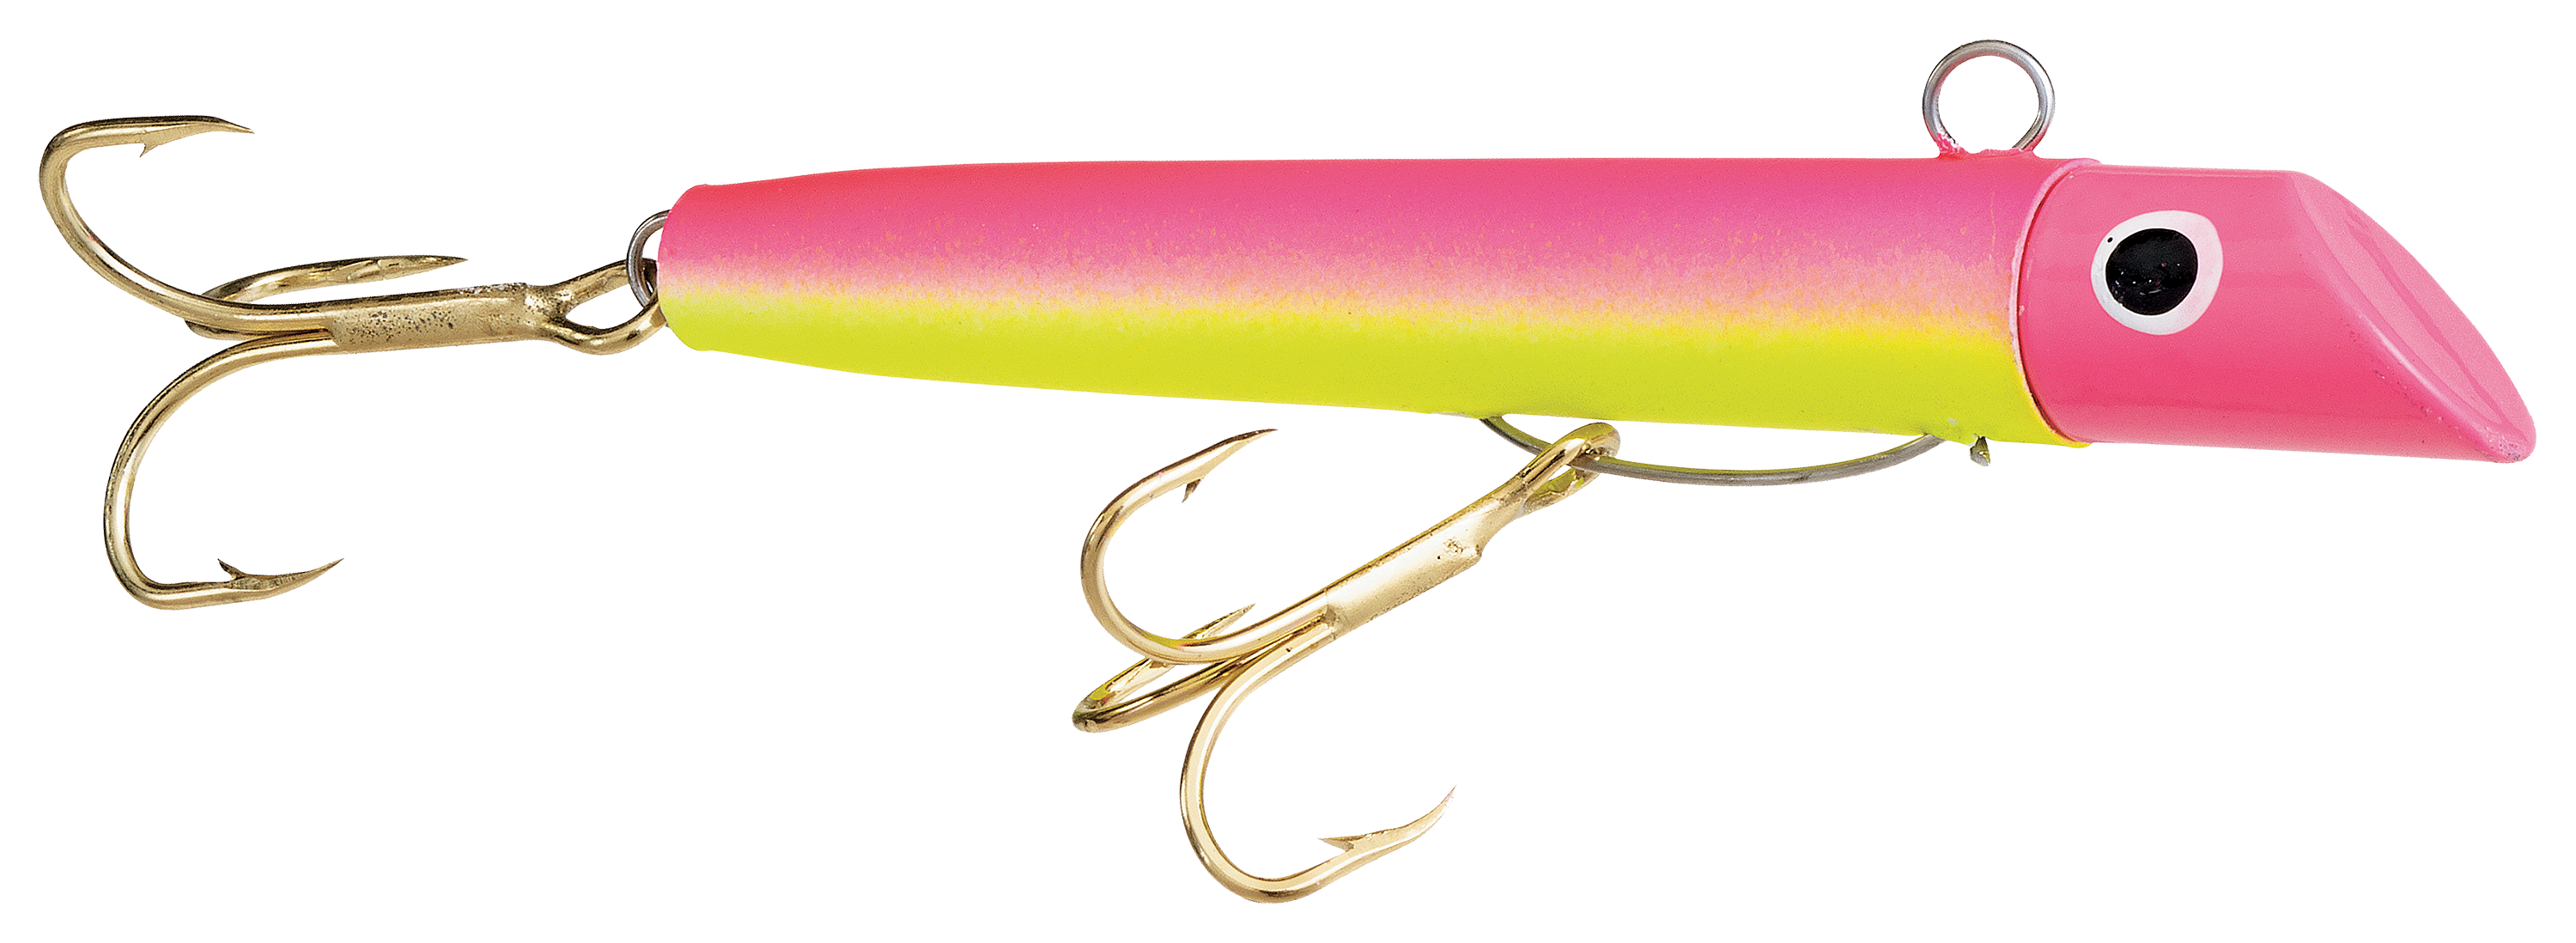  Got-Cha Pro Lures  Colorful Fishing Lures for Spanish Mackerel,  Bluefish, Trout : Sports & Outdoors